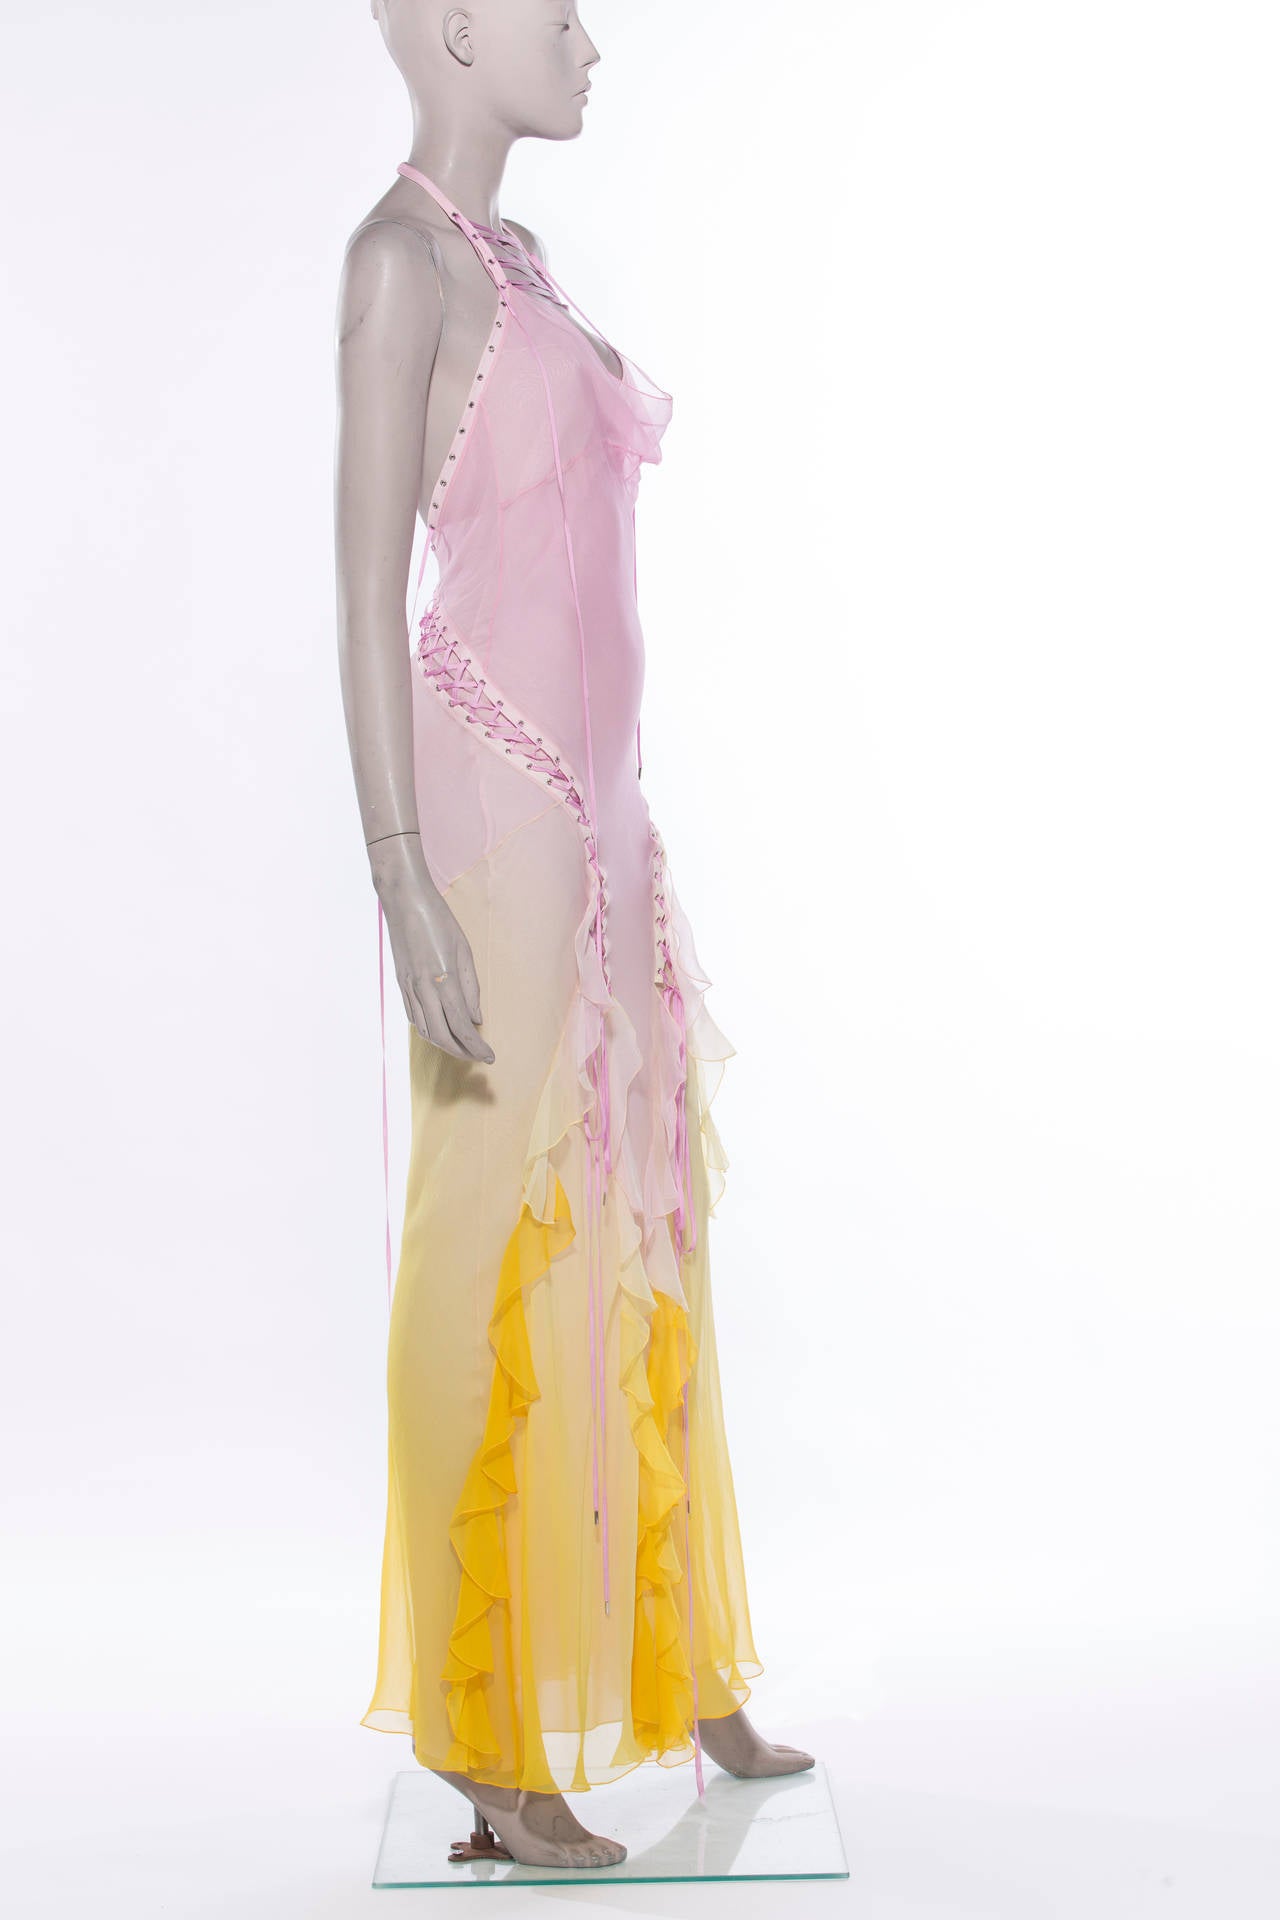 Christian Dior by John Galliano ombre sleeveless, multi layer, silk chiffon gown with buckle closure at back.

Bust 32”, Waist 30”, Hip 36”, Length 52”

EU. 42
US. 6